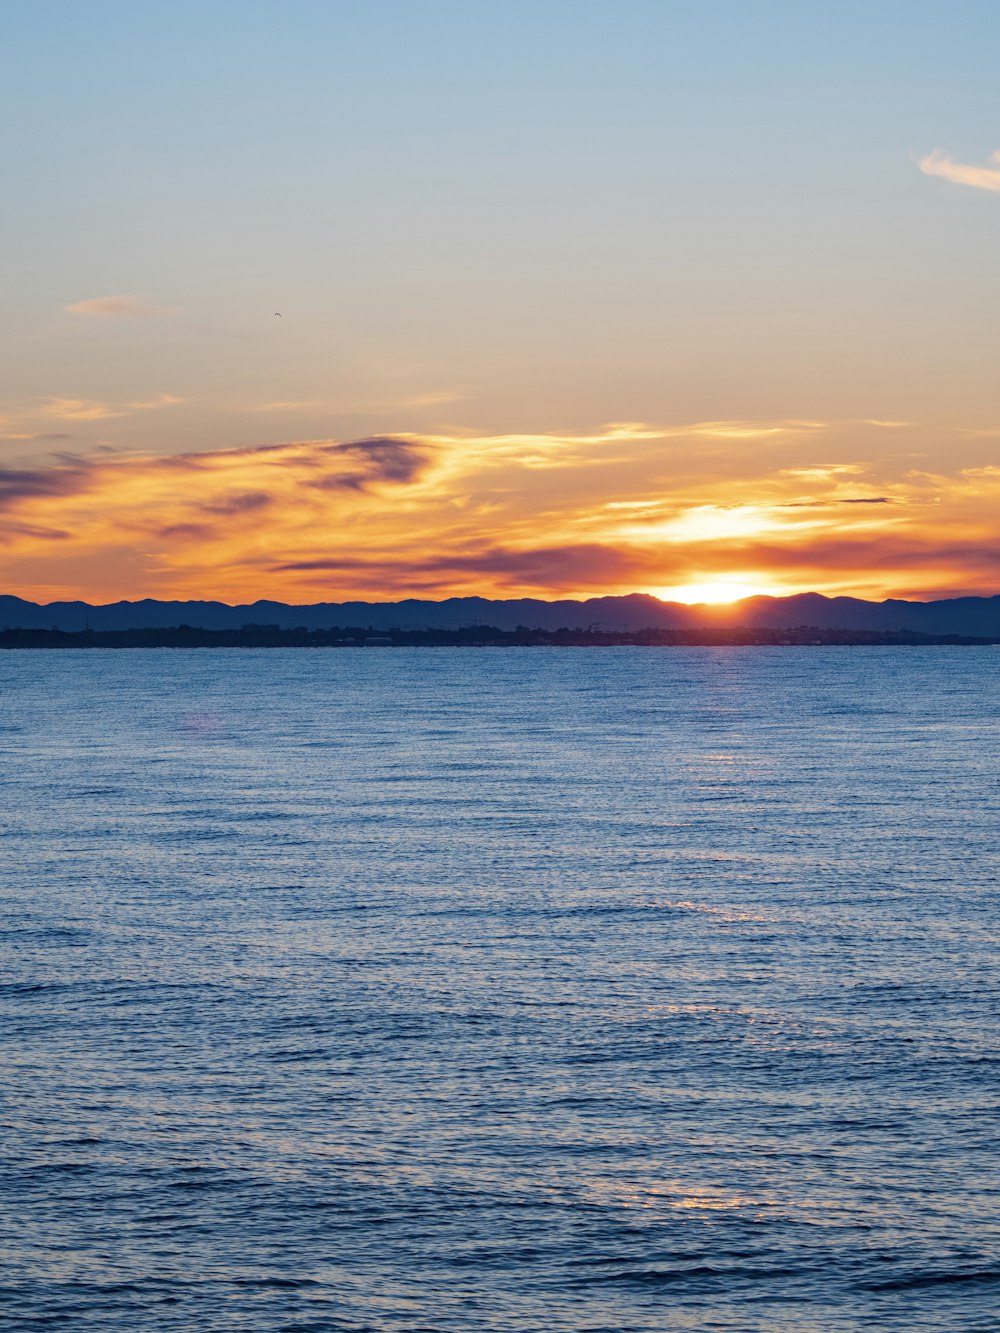 the sun is setting over the ocean with mountains in the distance